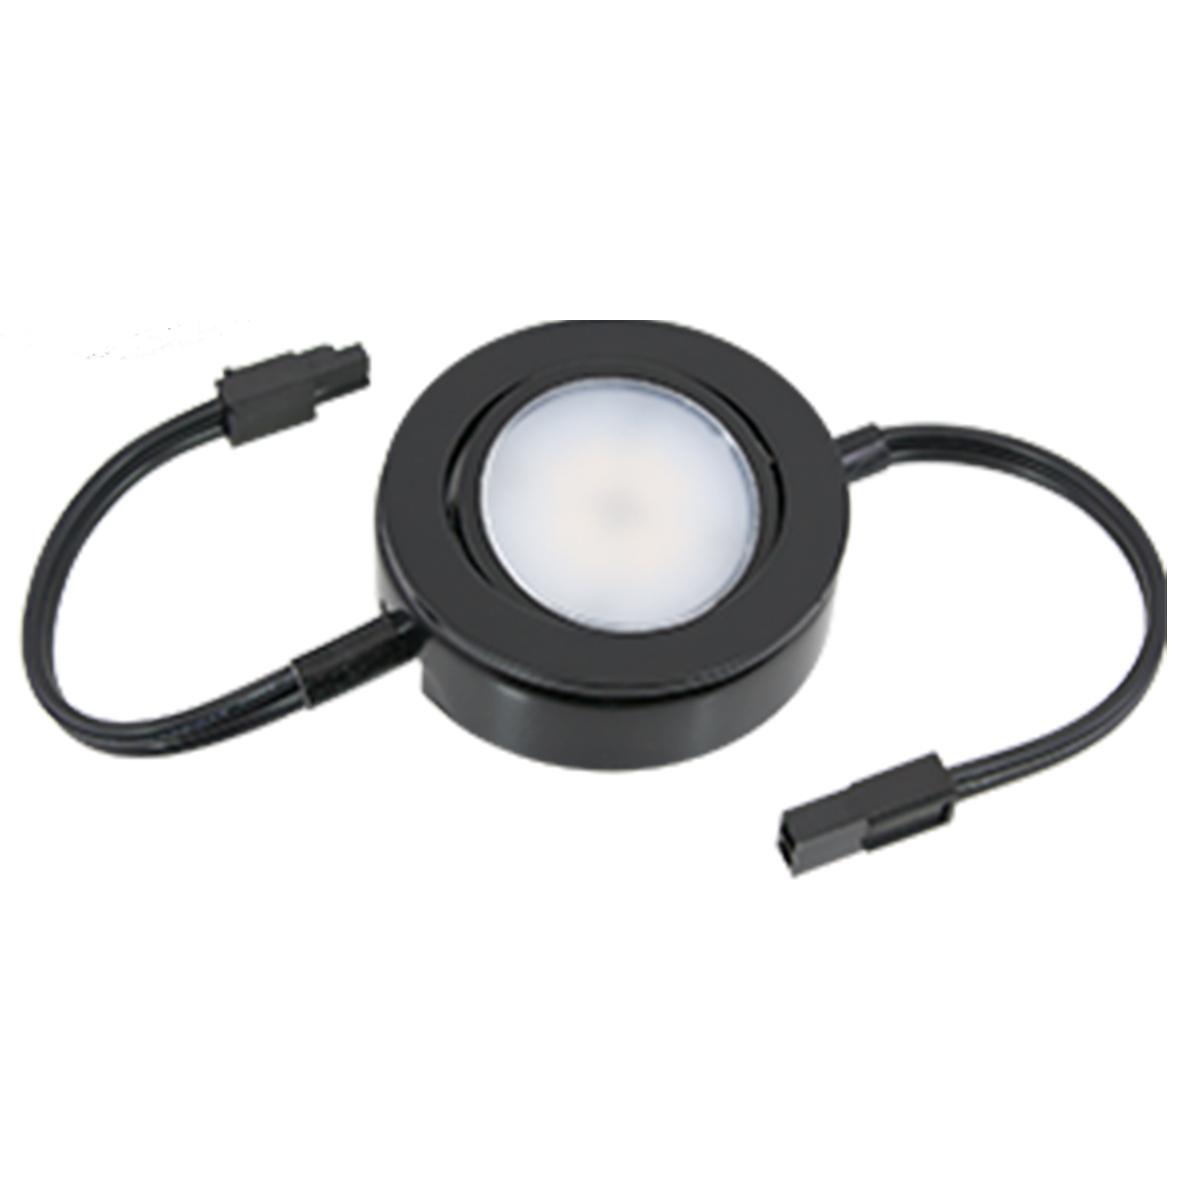 MVP LED Puck Light with Lead and Tail wires, 4.3 Watts, 2700K, 120V, Black